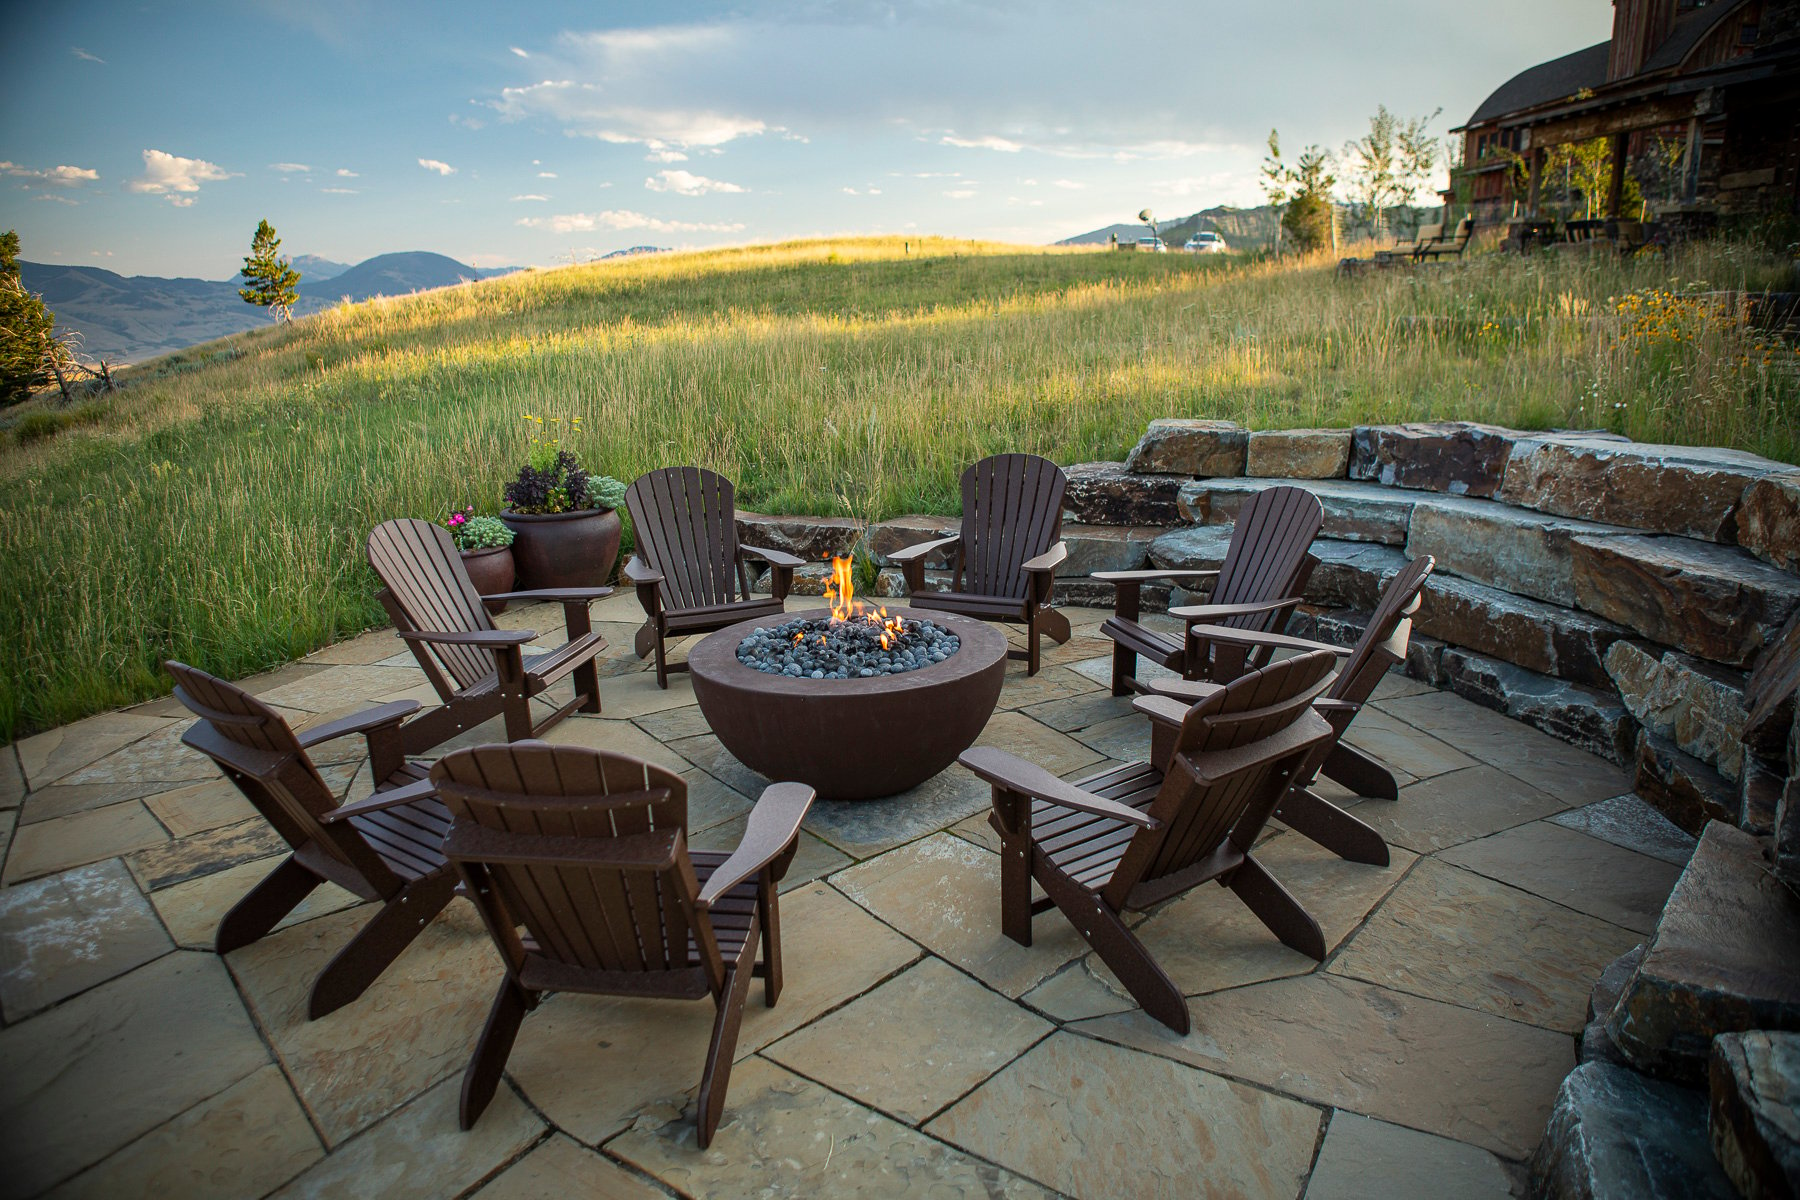 Fire pit and patio design to fit clients wants